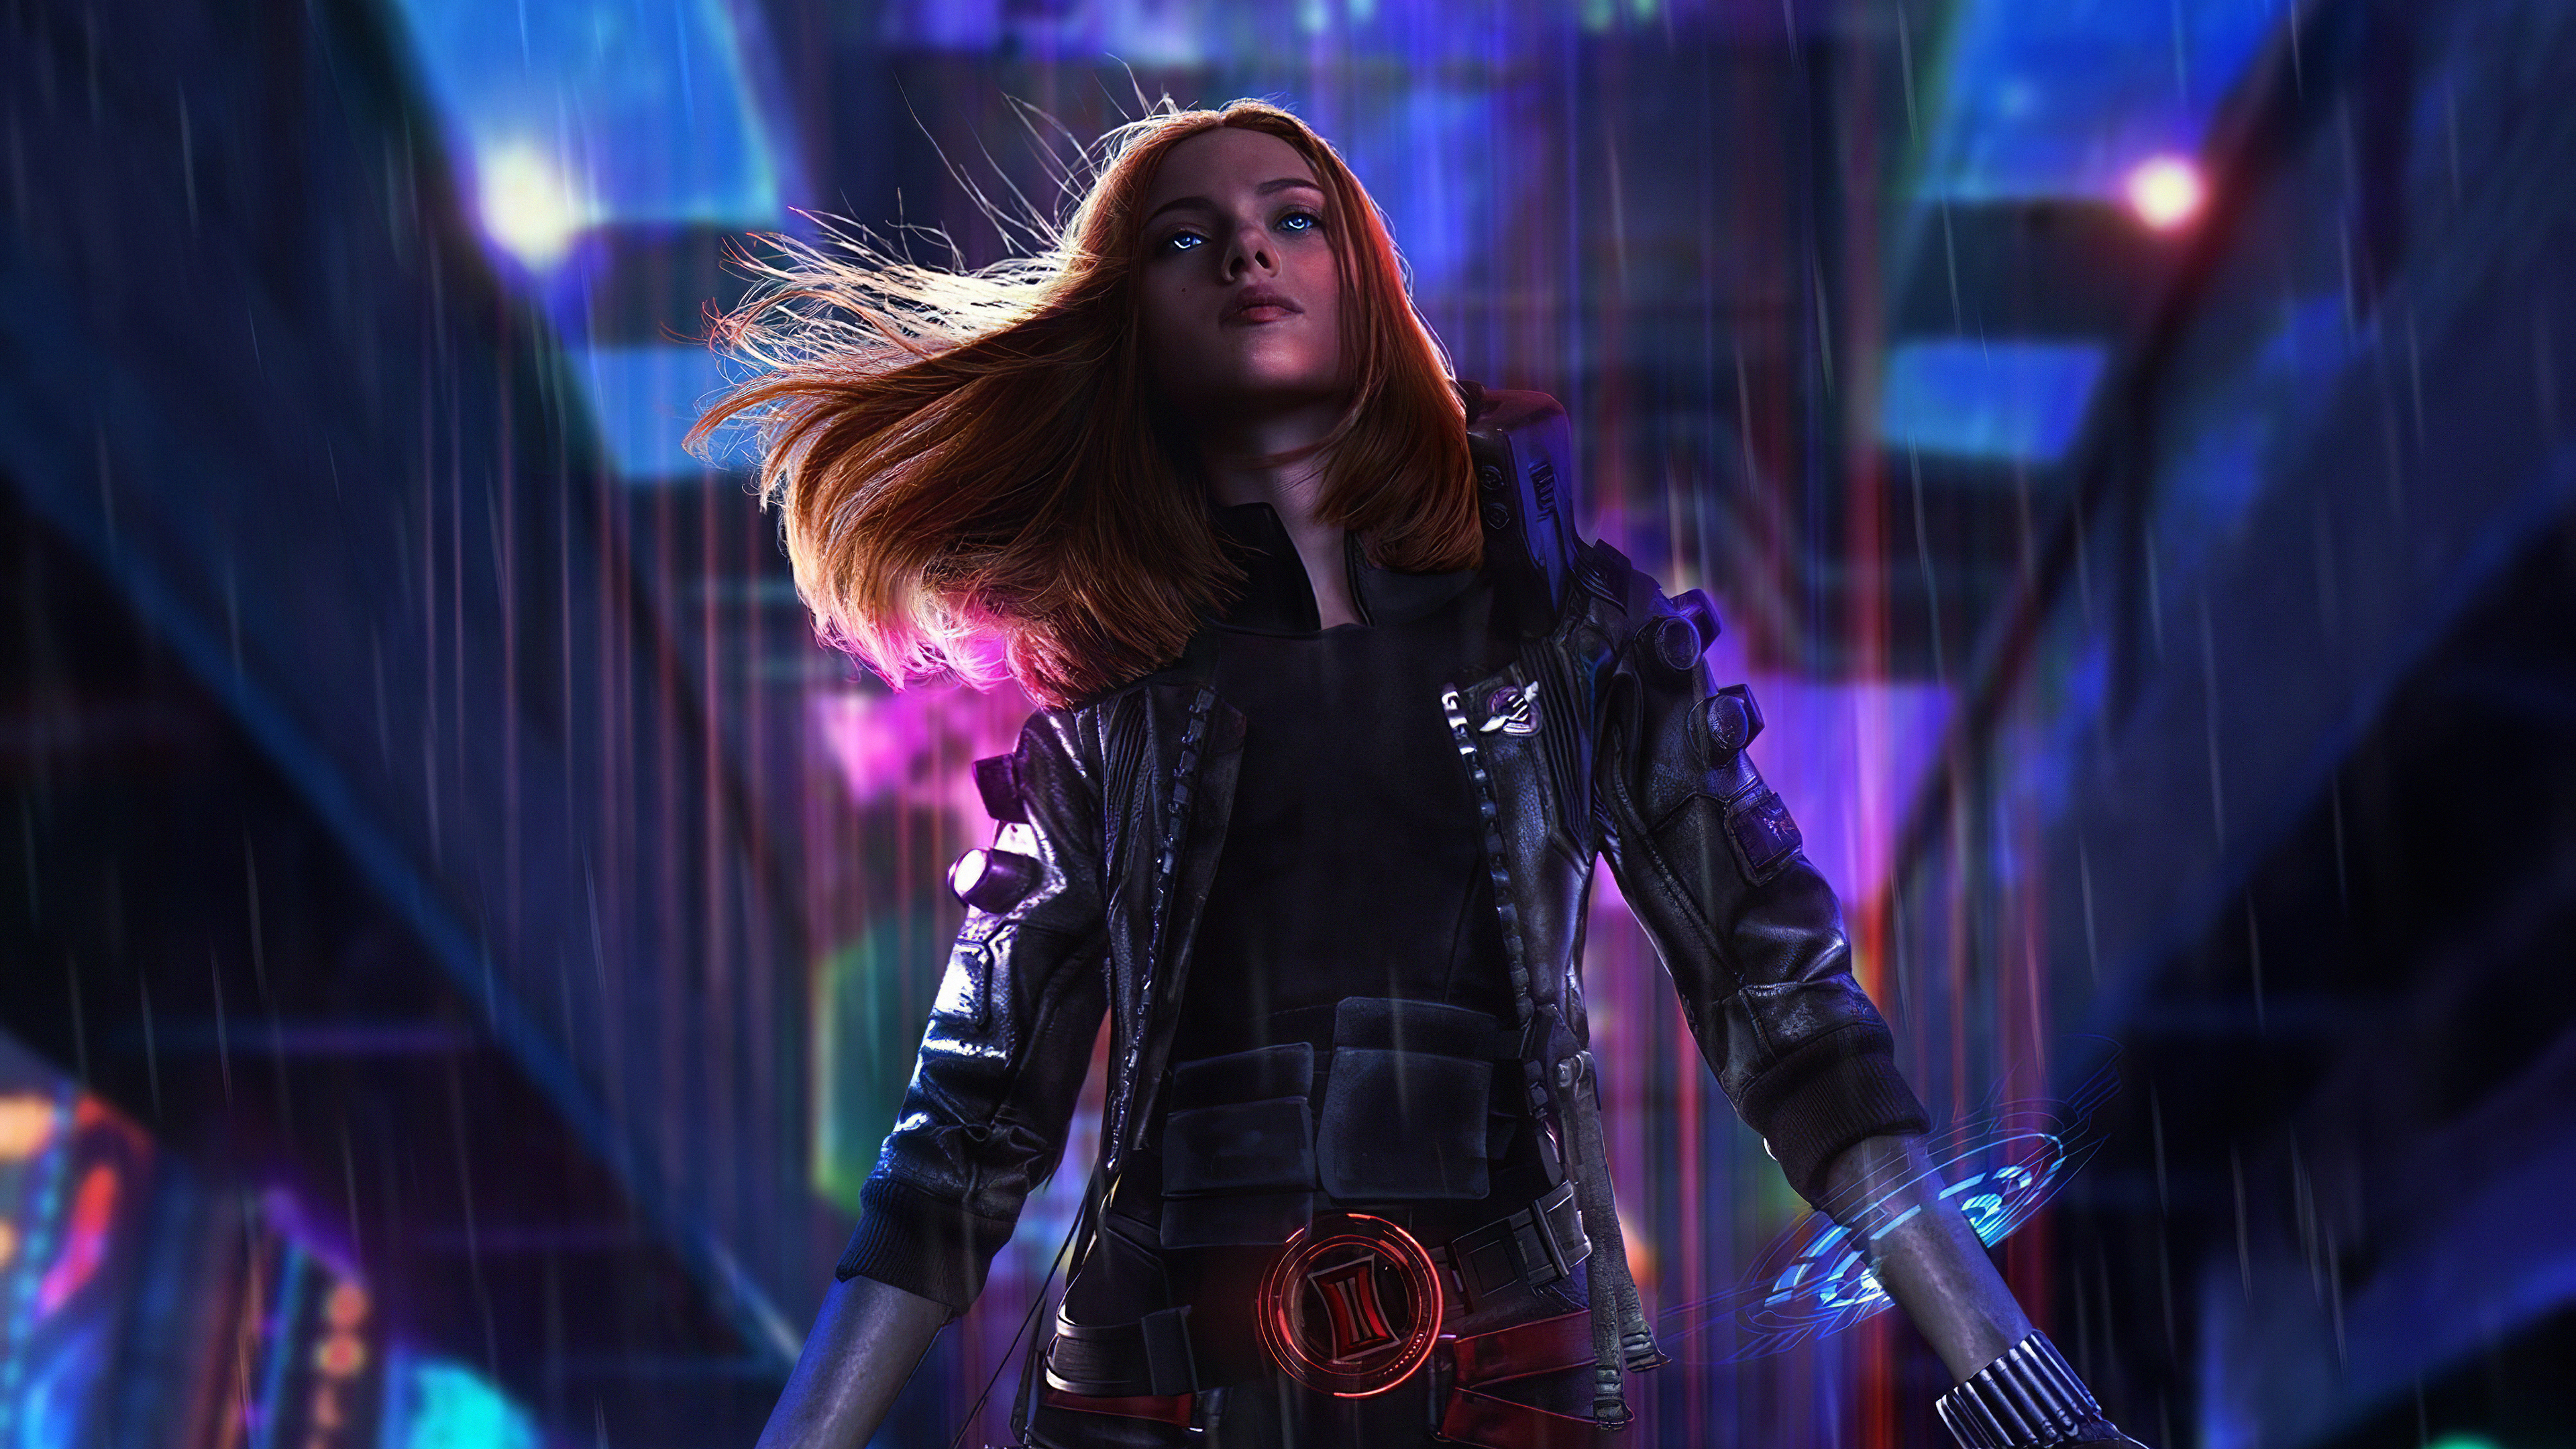 Black Widow Hd Wallpapers For Mobile